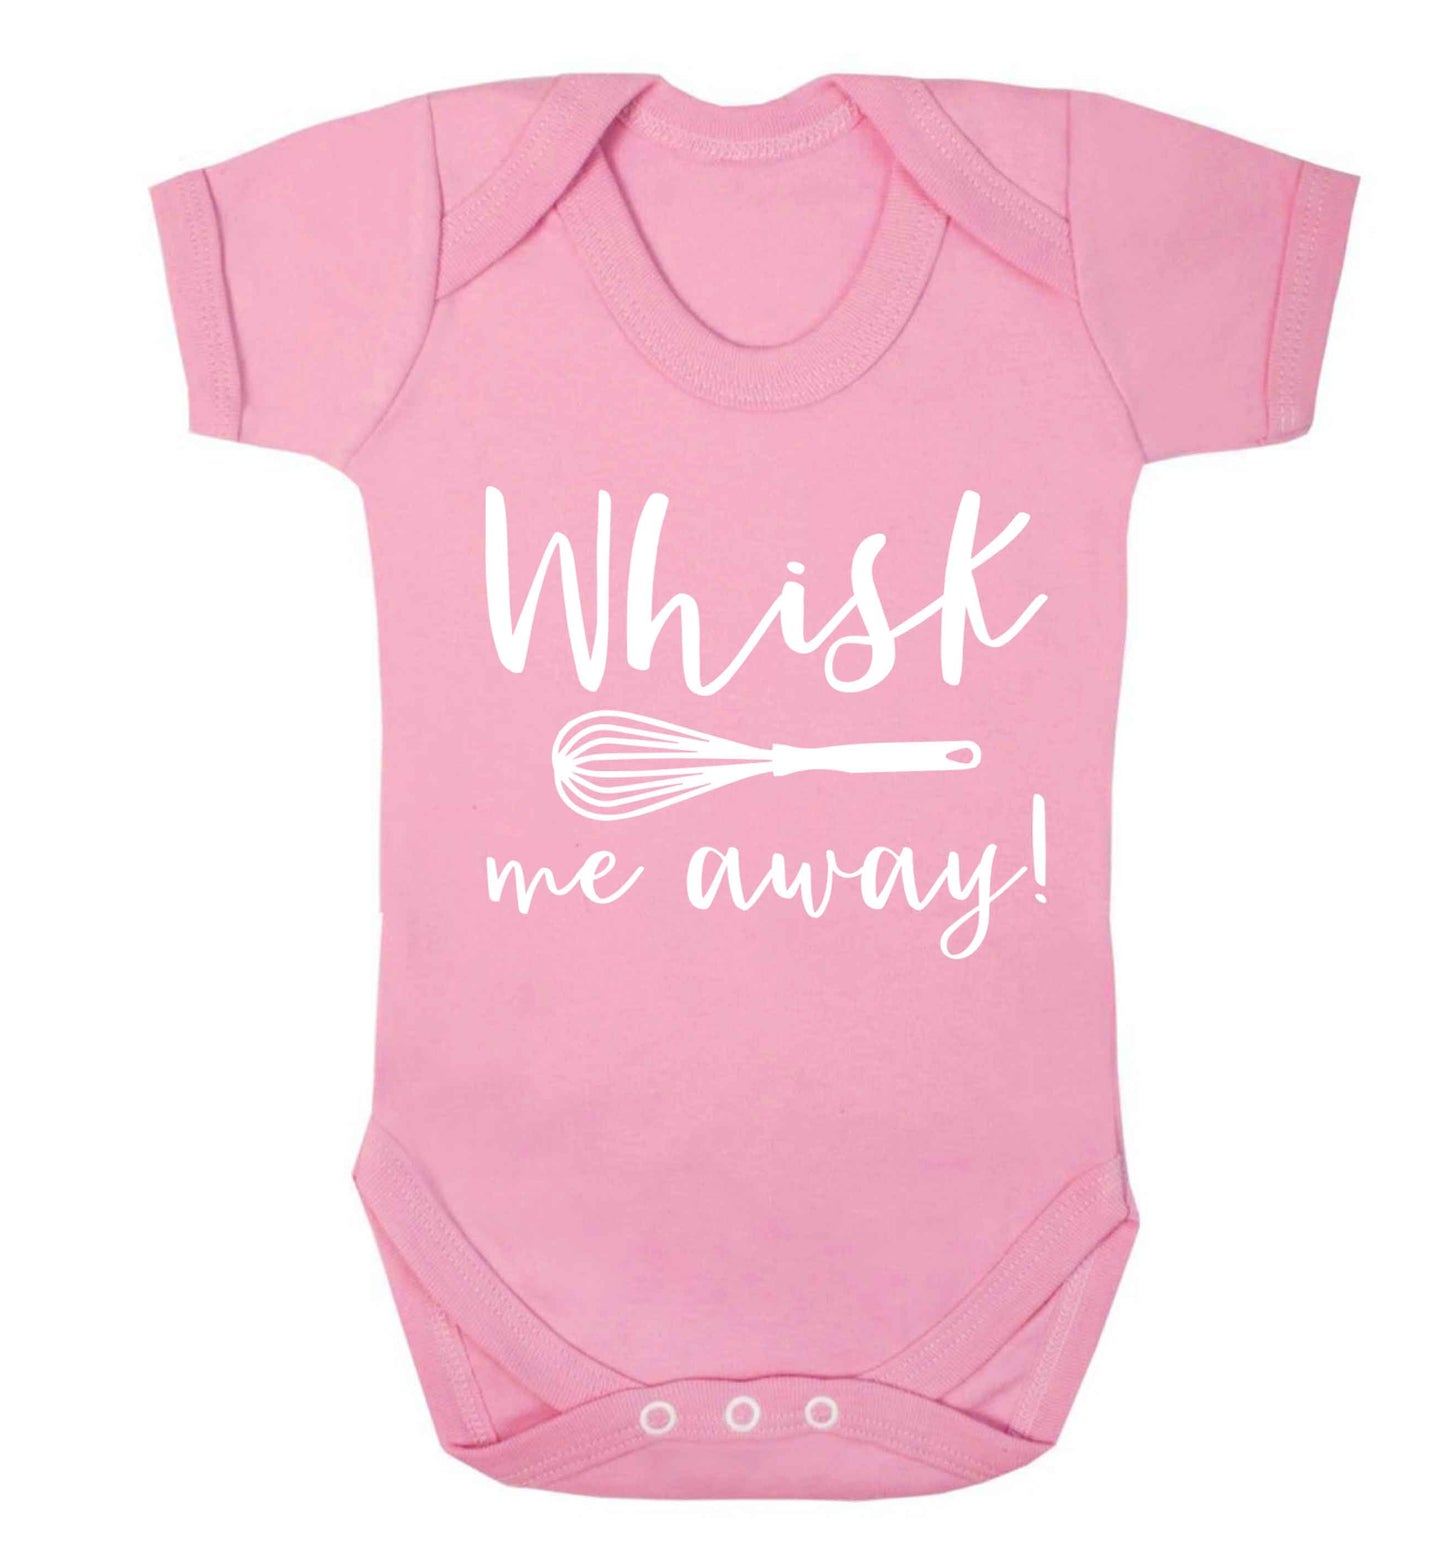 Whisk me away Baby Vest pale pink 18-24 months